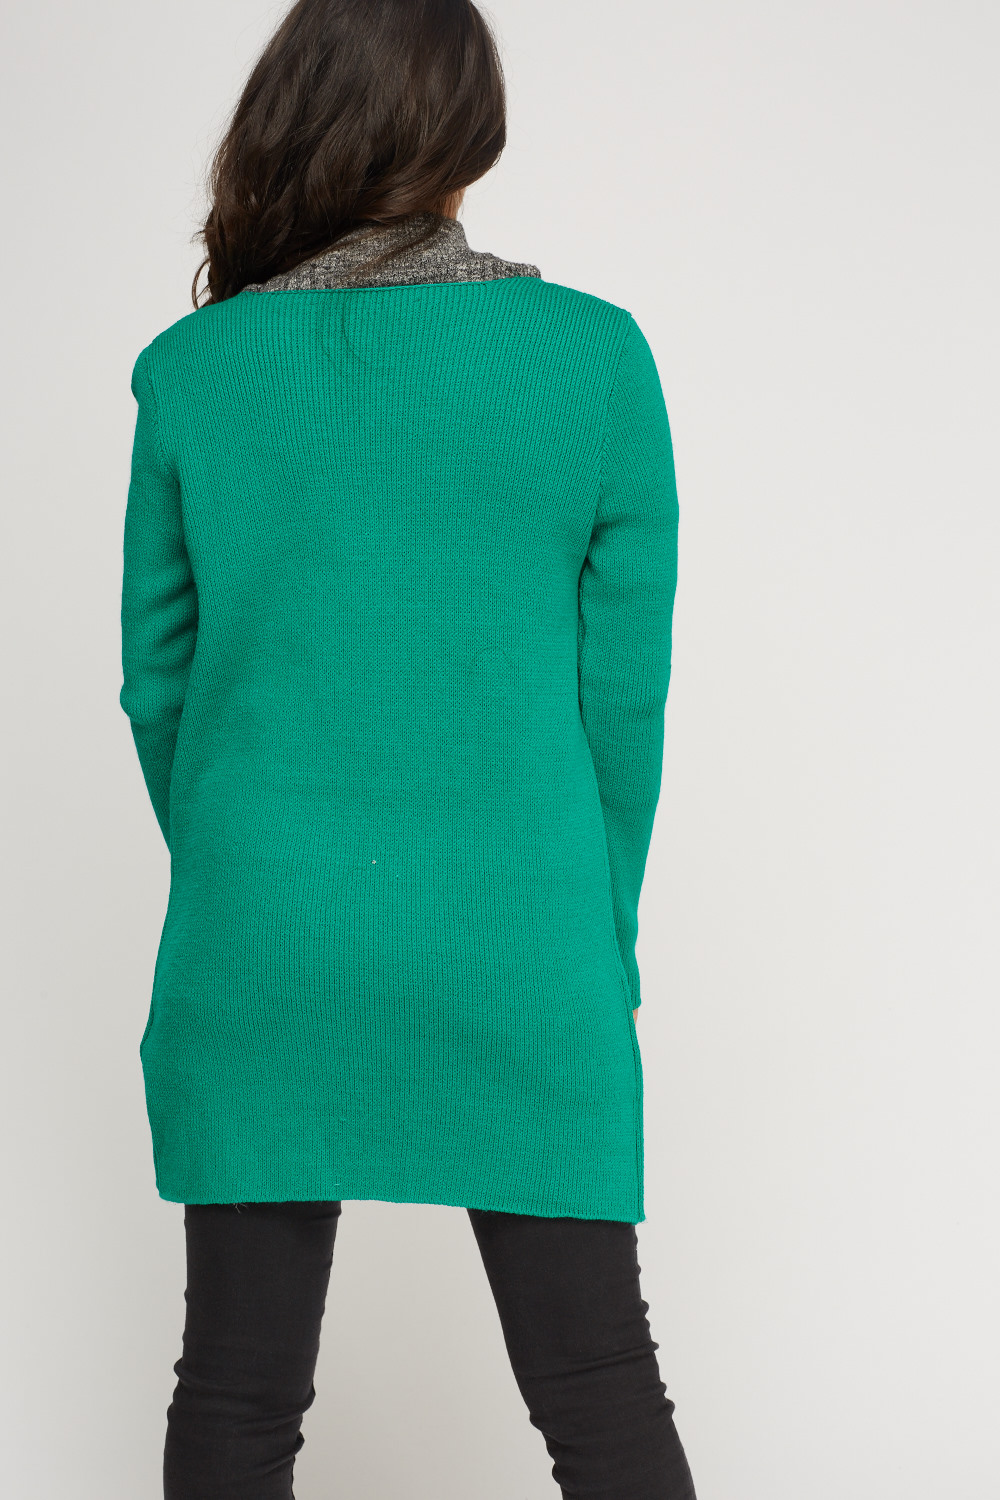 Waterfall Green Knitted Cardigan - Just $7